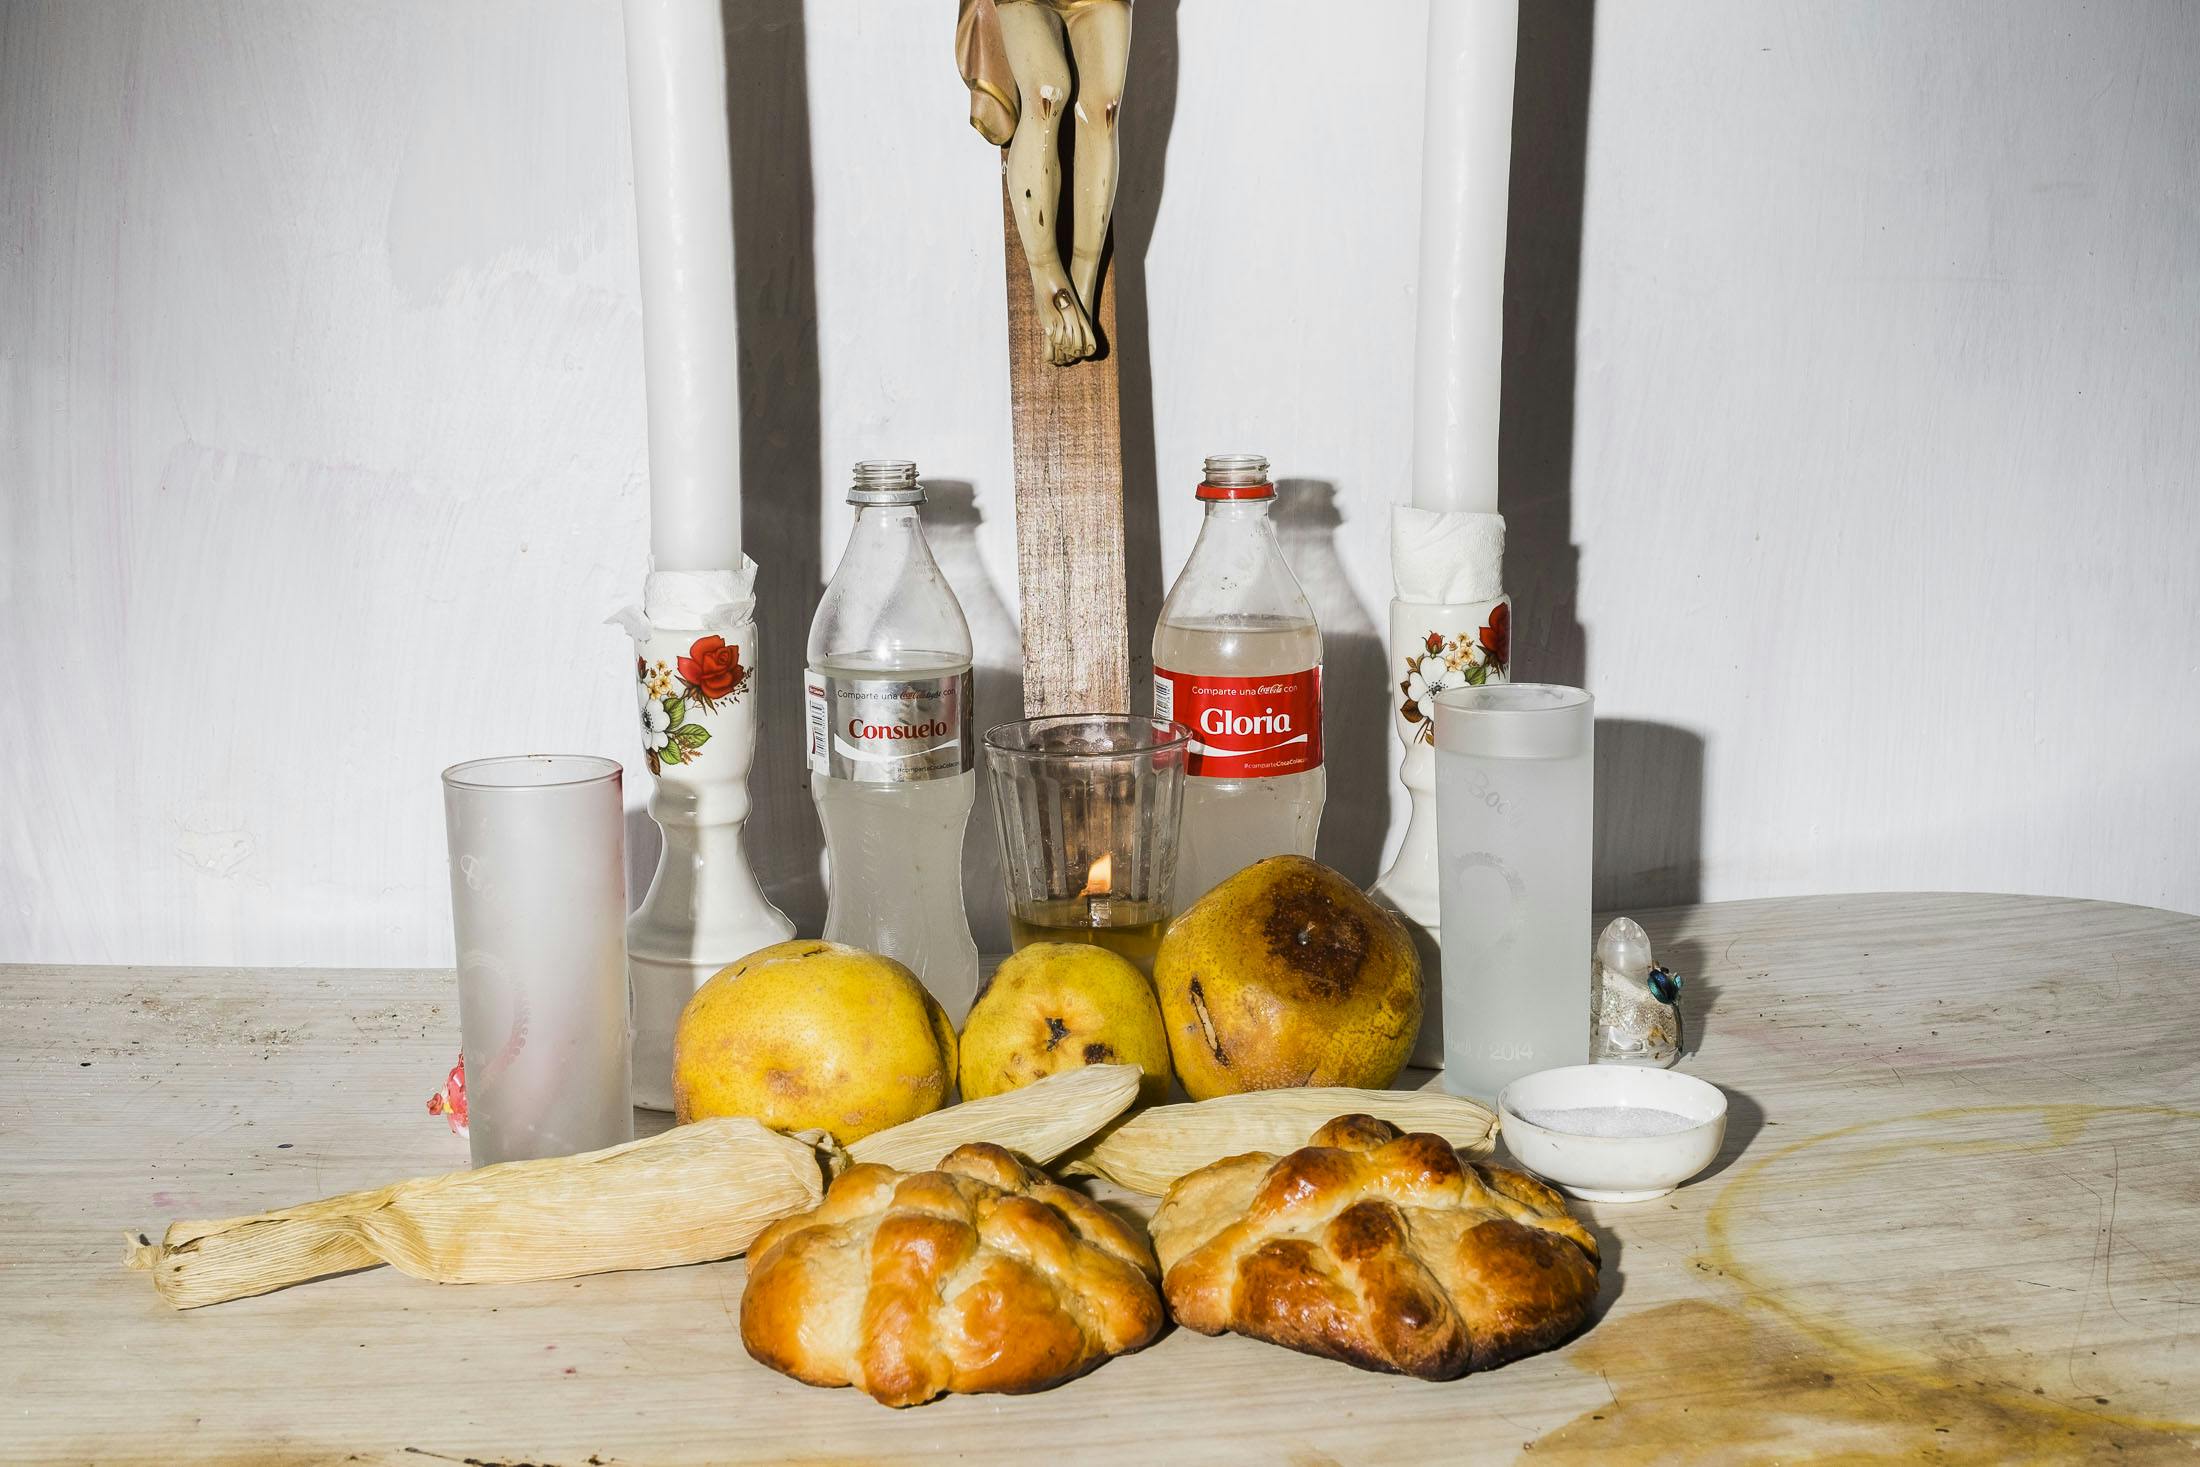 Day of the dead offerings with coke bottles and bread